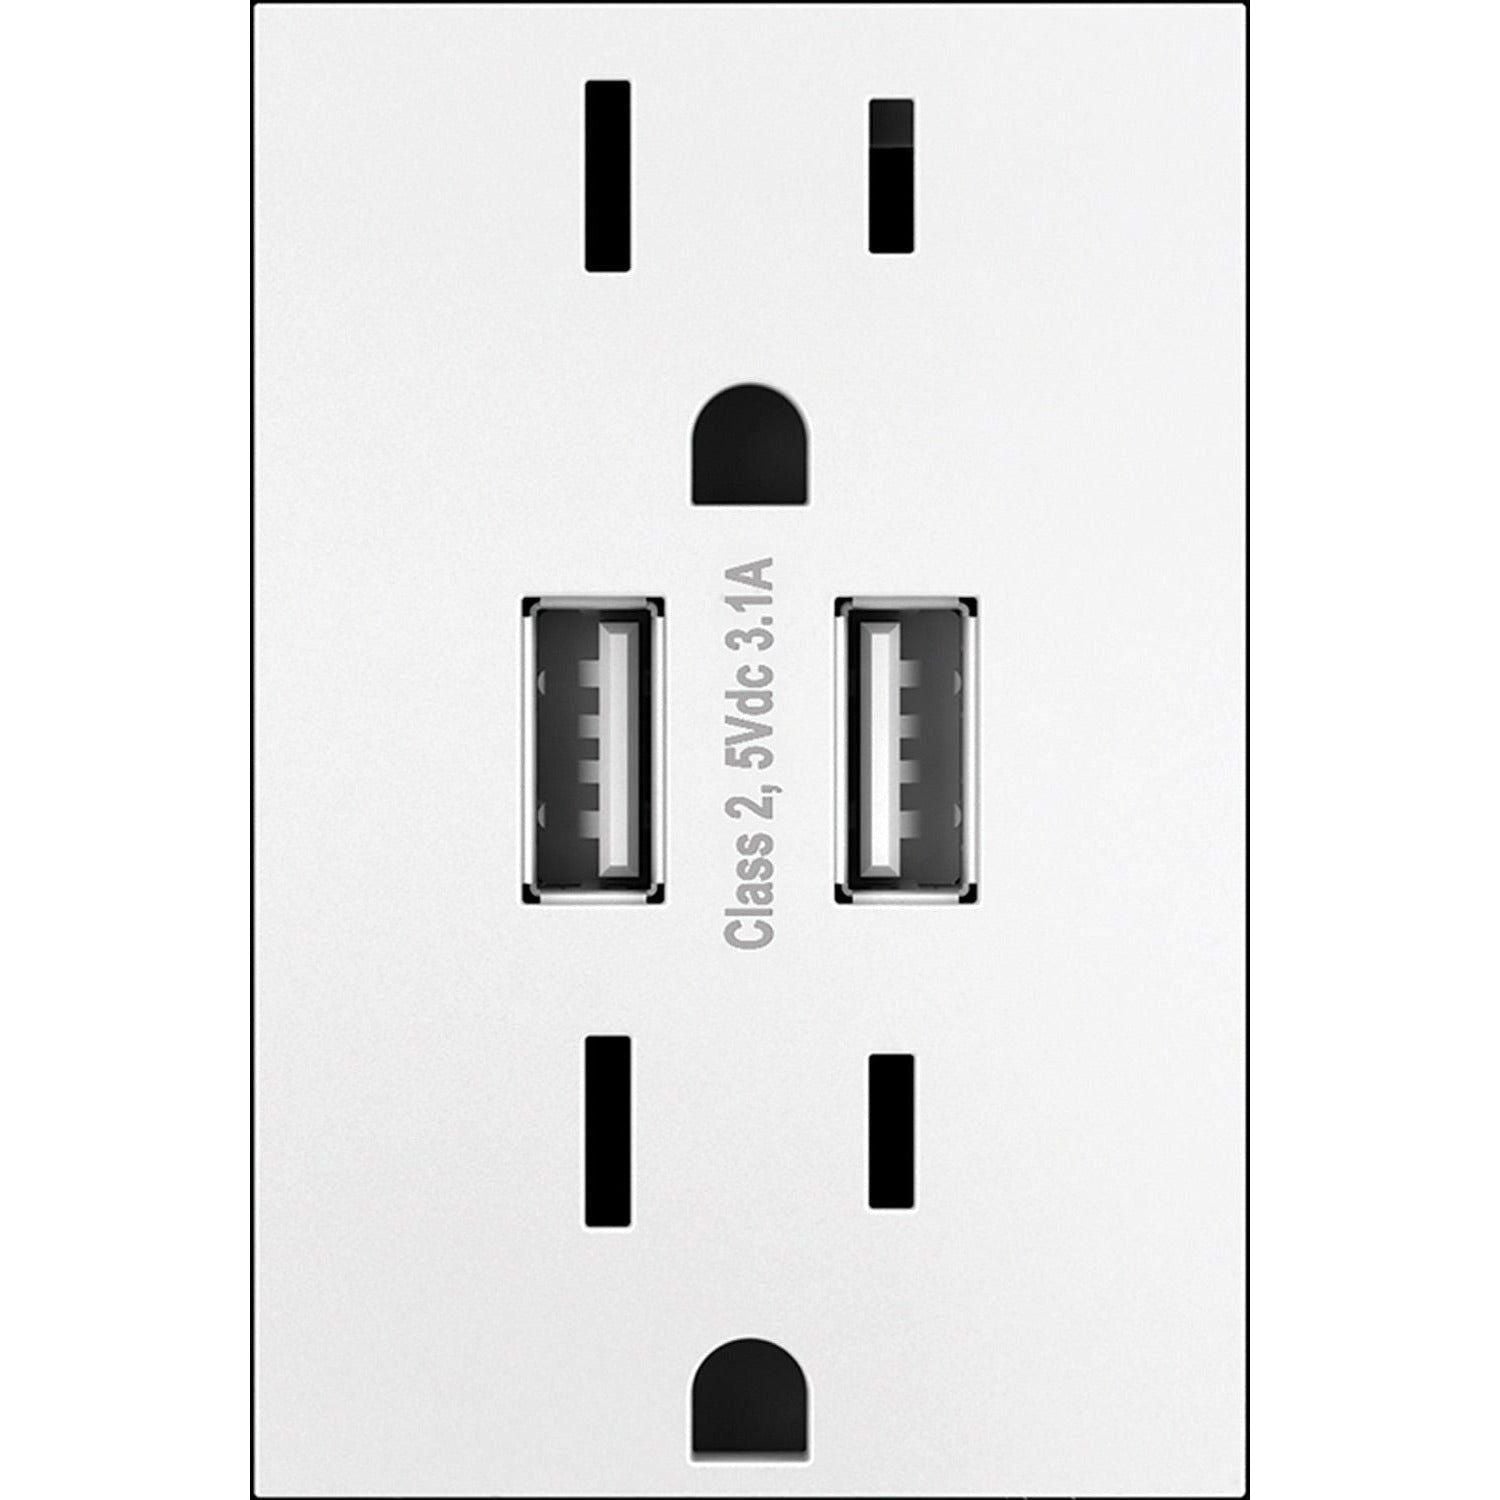 Legrand - Dual USB Plus-Size Outlet Combo - Lights Canada